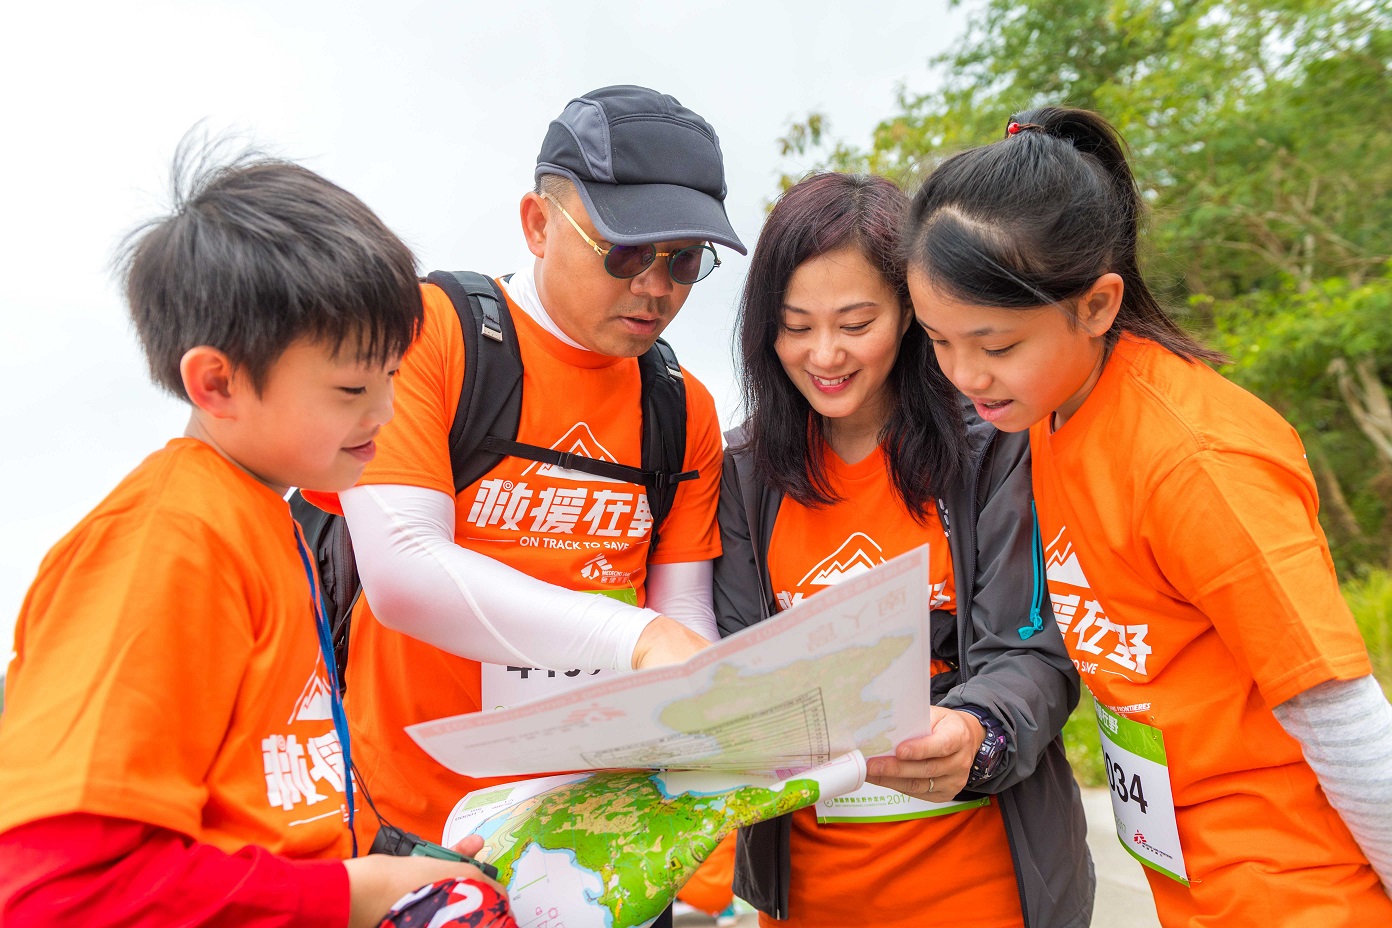 Teams from AIA Hong Kong unite to lead by example in adopting a healthy lifestyle by actively taking part in MSF's orienteering competition 